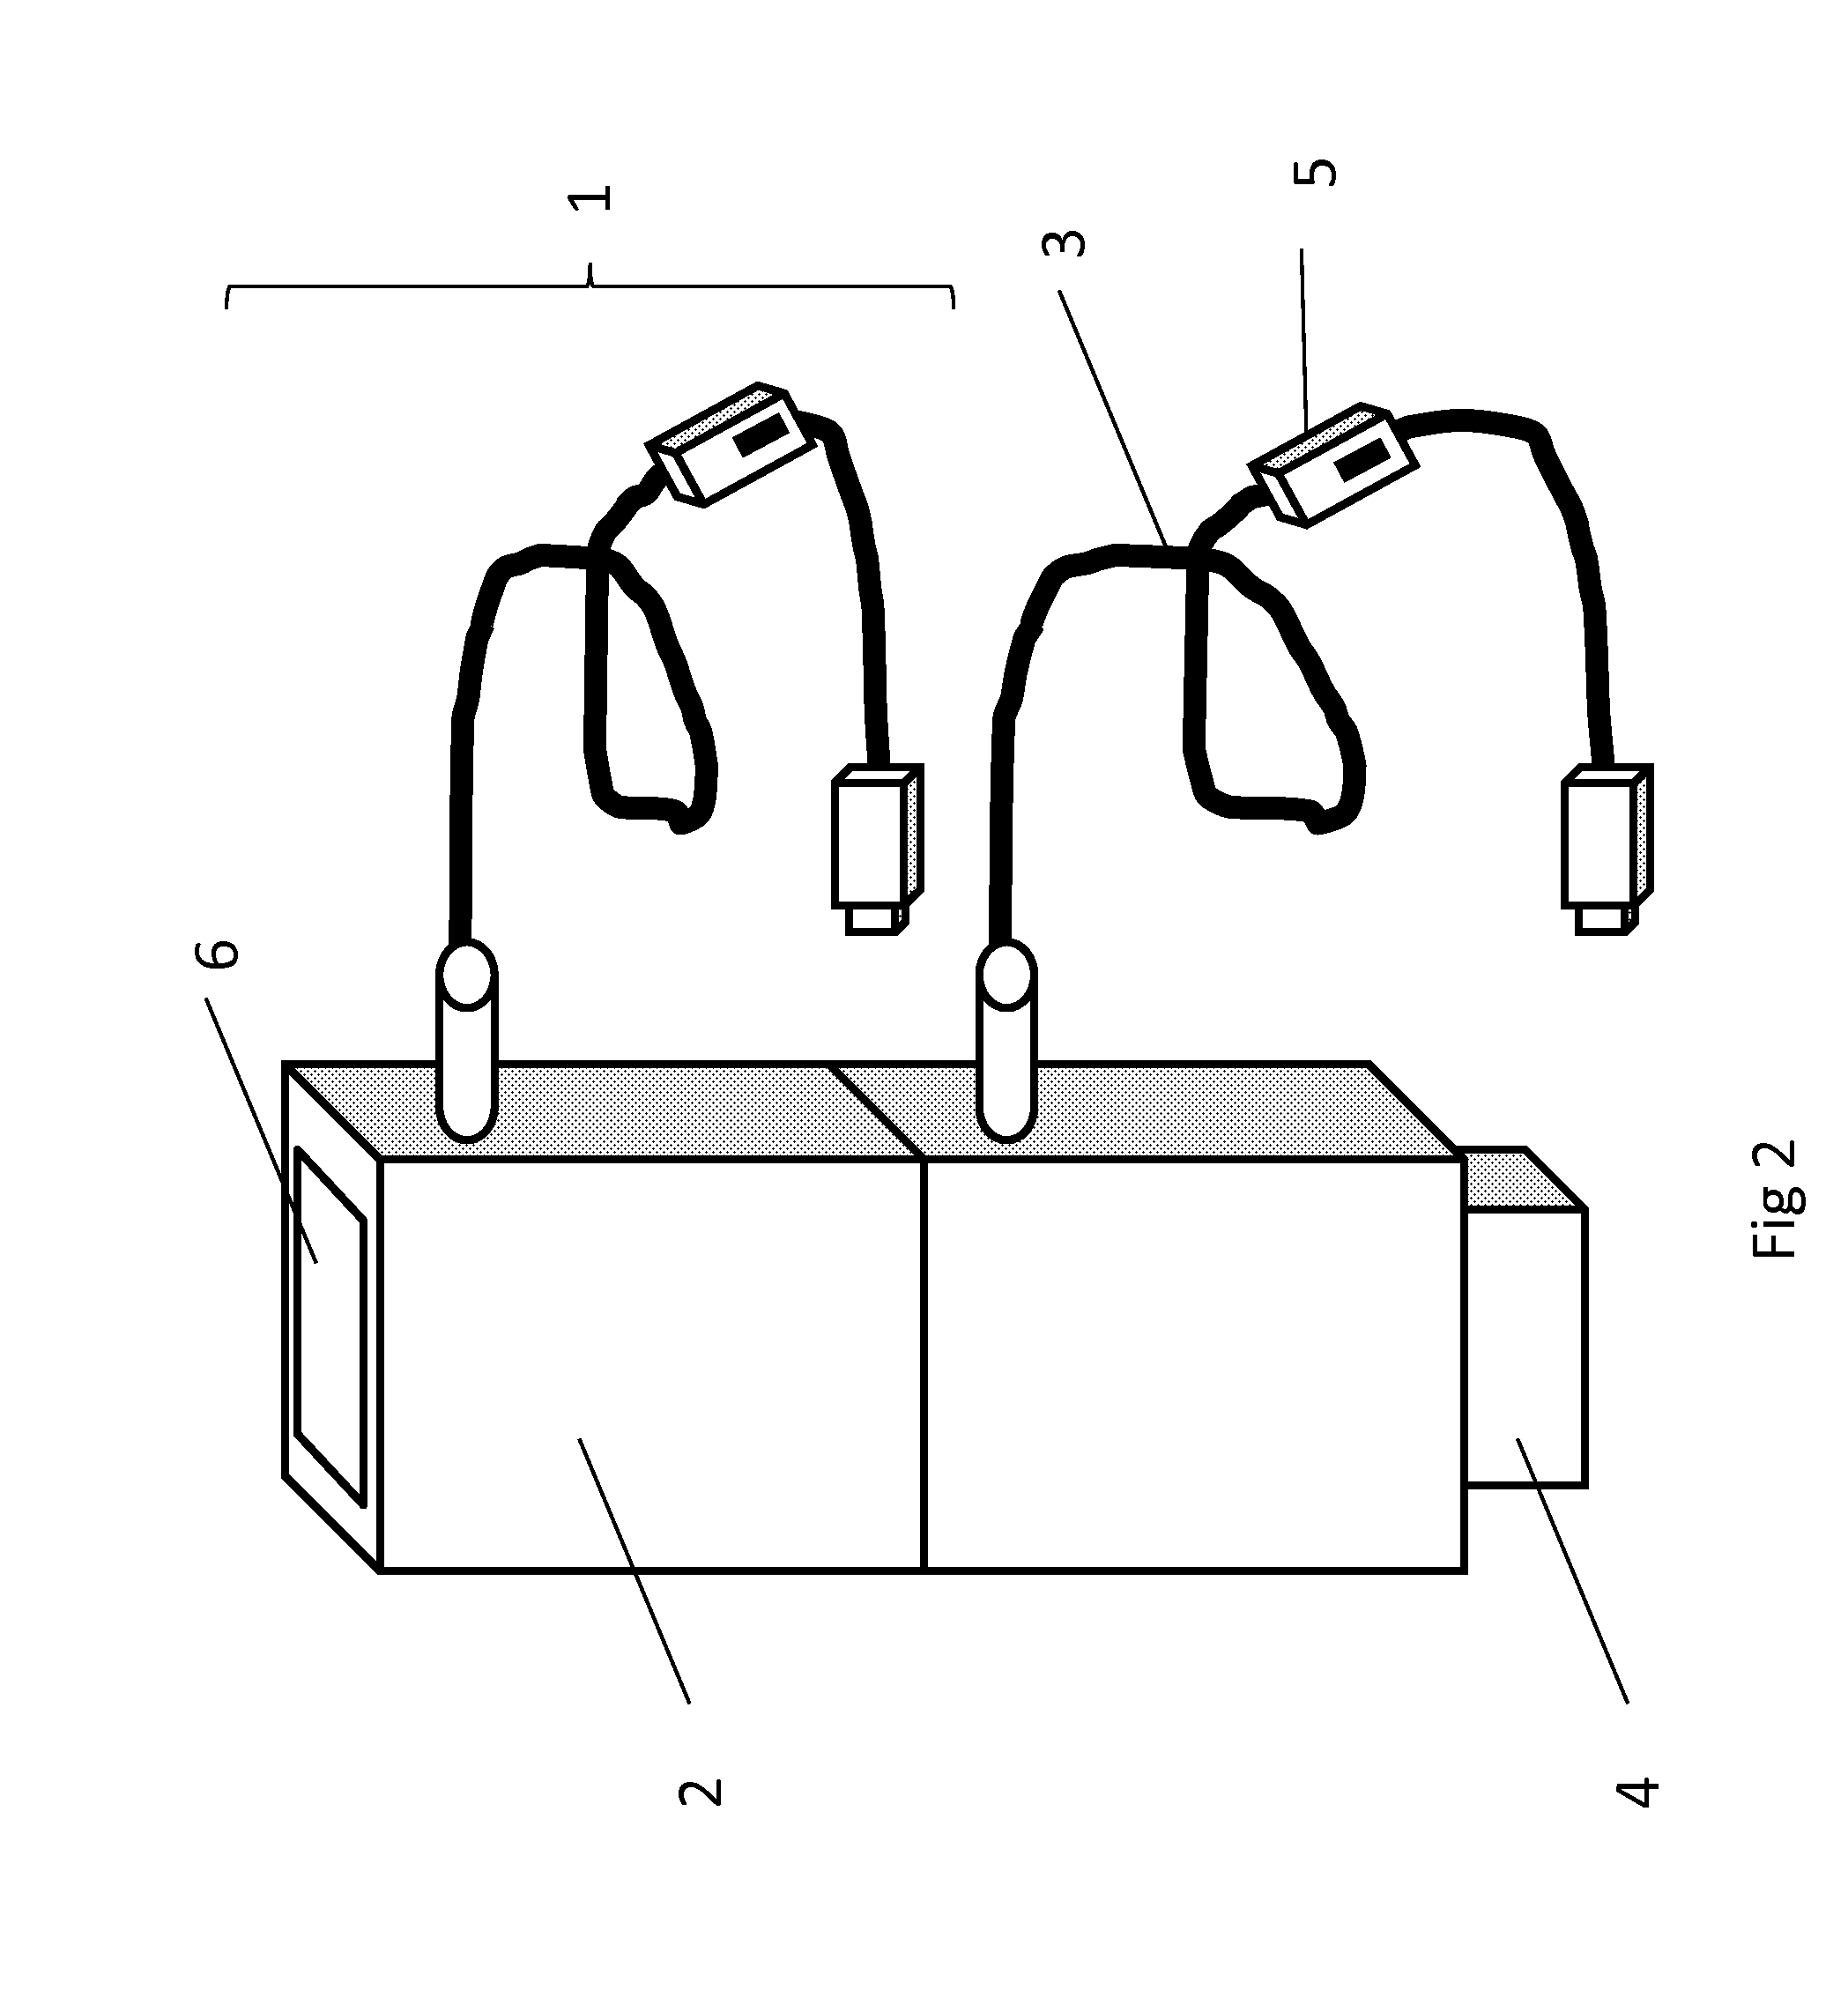 Plug with integrated self-replicated socket